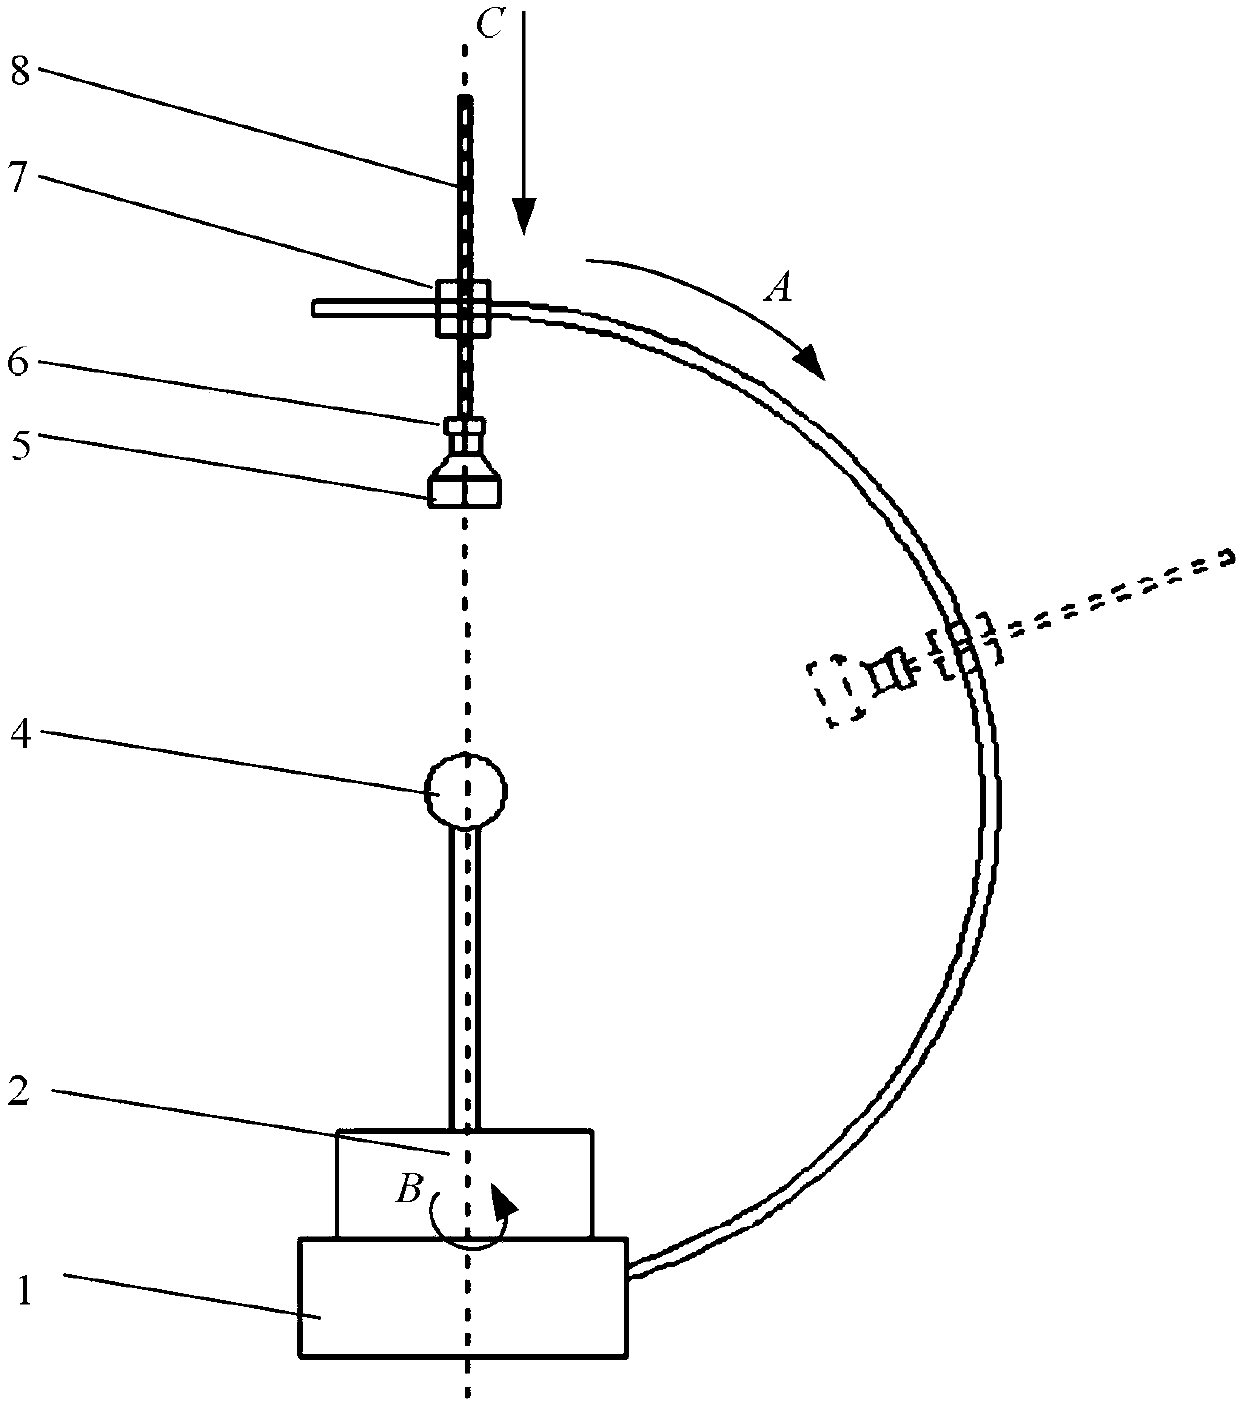 Two-degree-of-freedom guide rail for ellipsoidal glass bulb detection